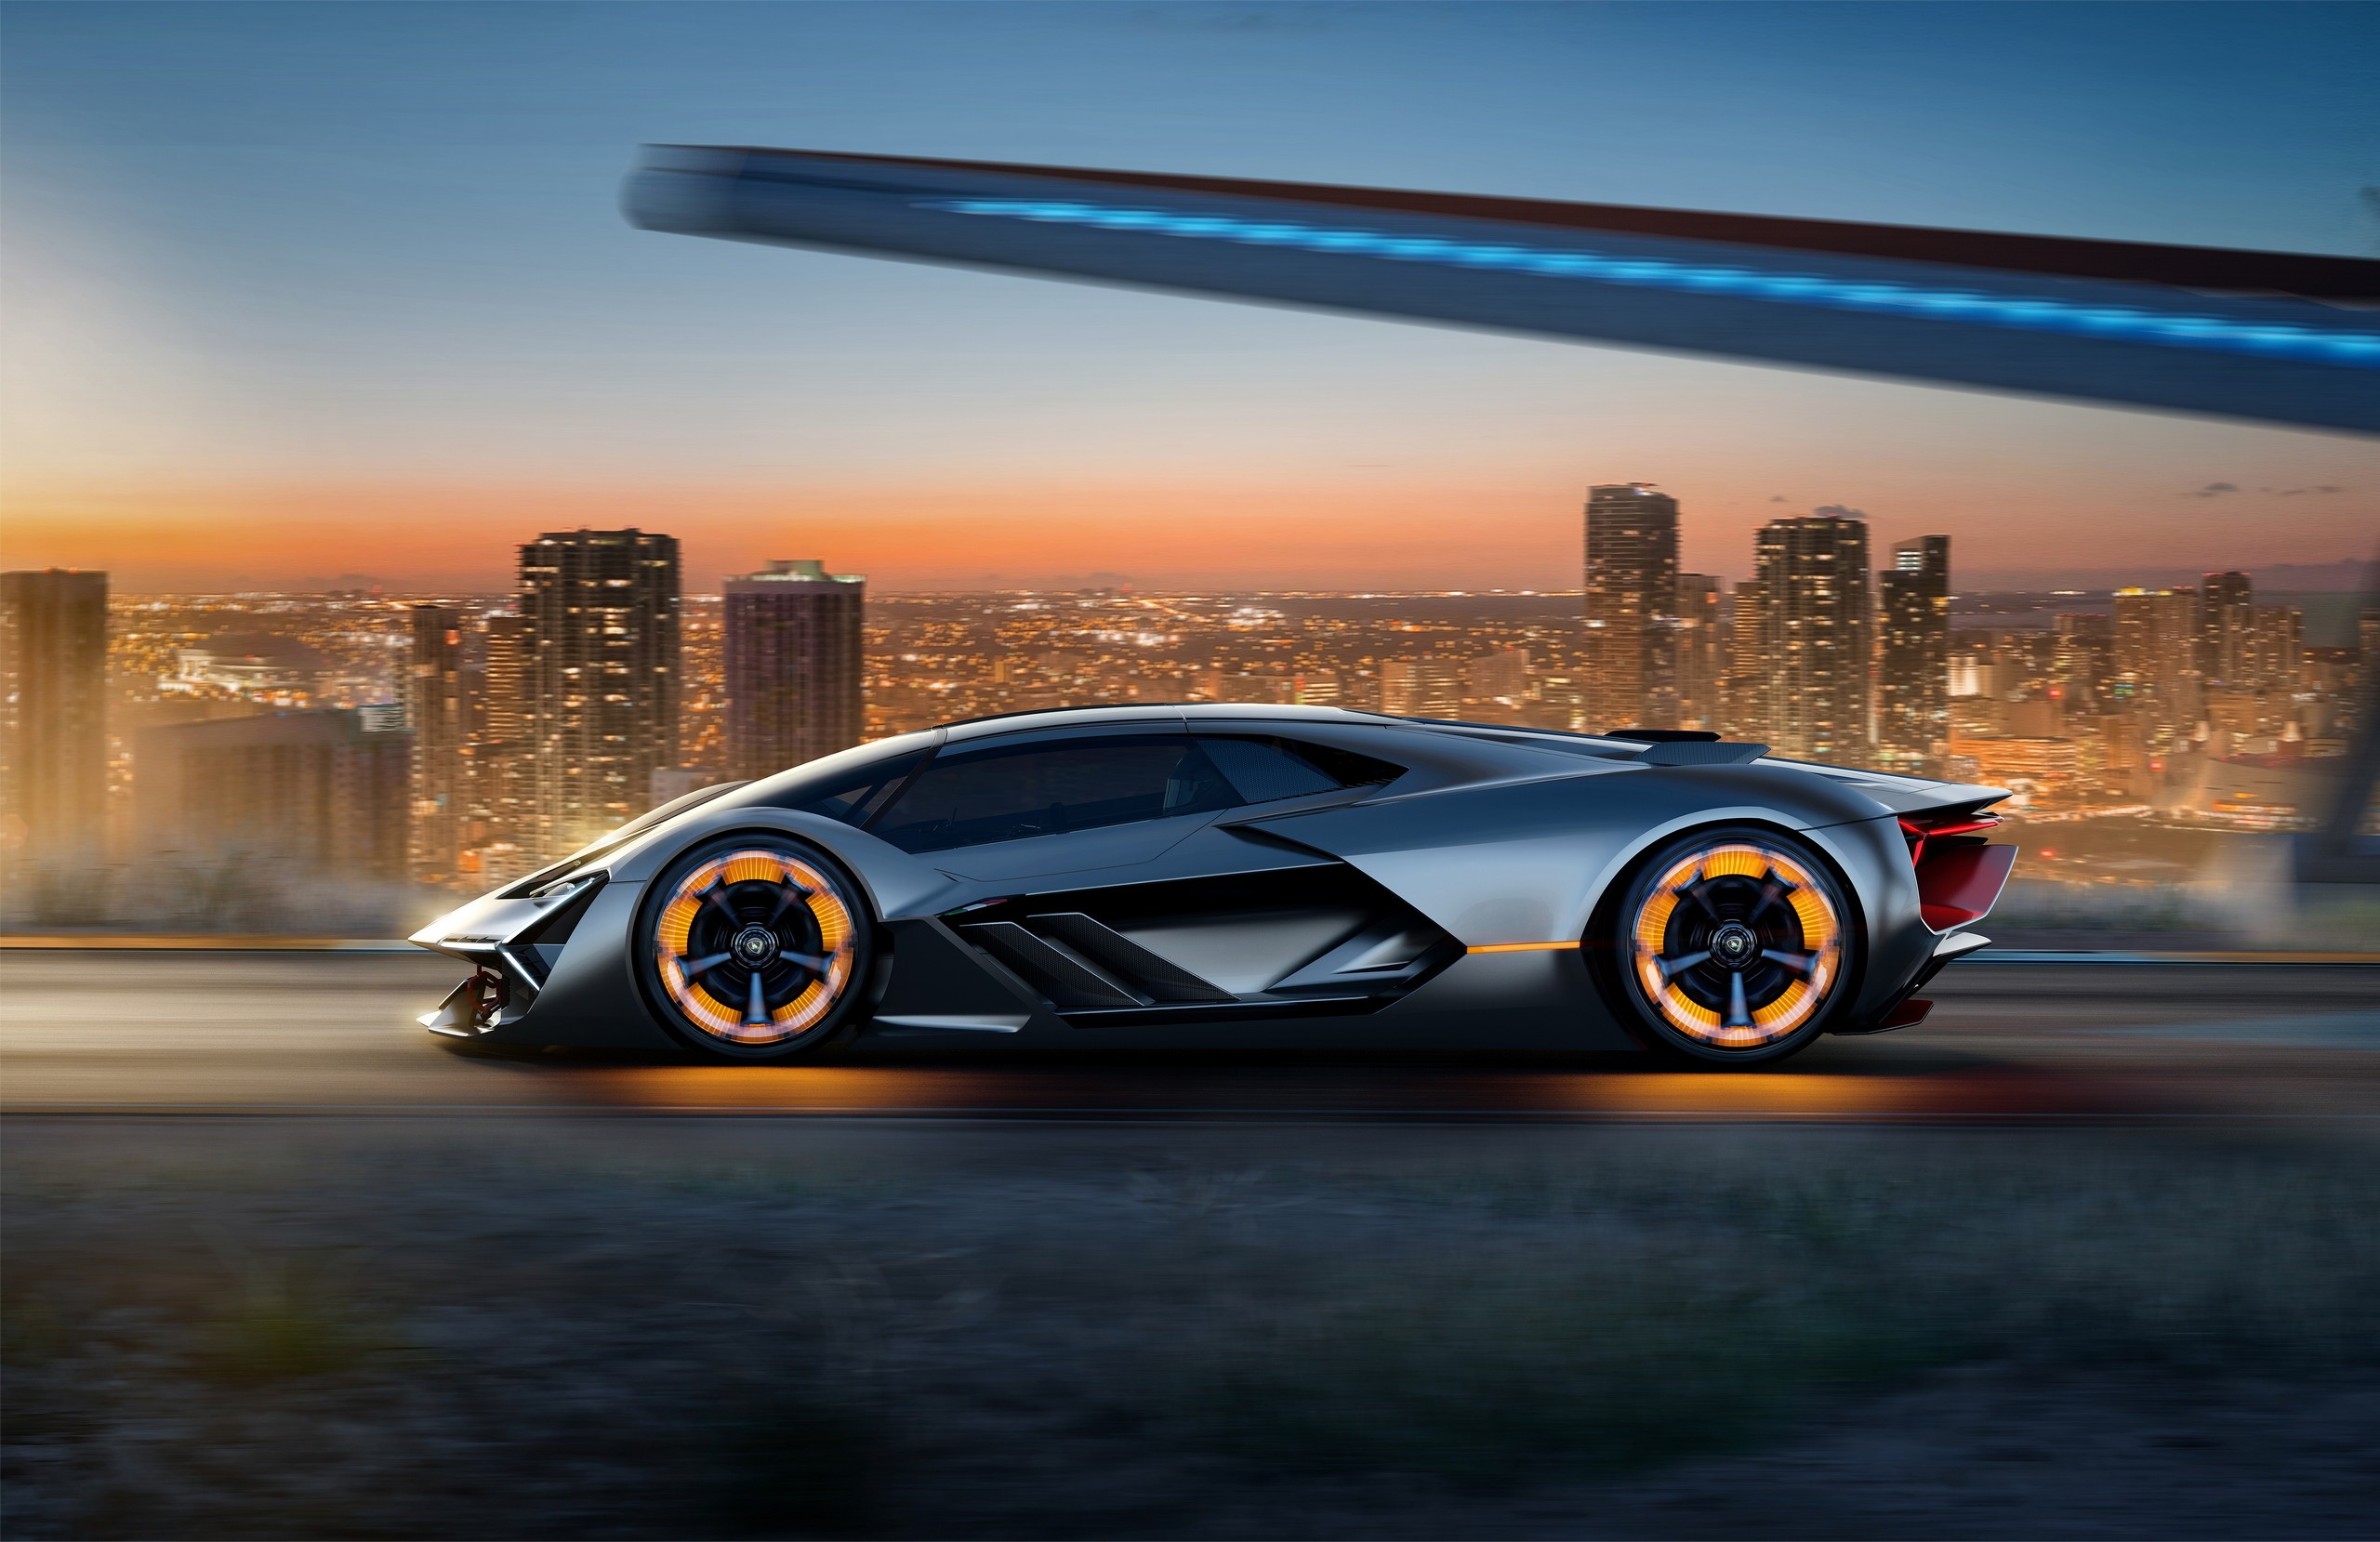 Electrified Lamborghinis Will Still Look Like 'Spaceships', Design